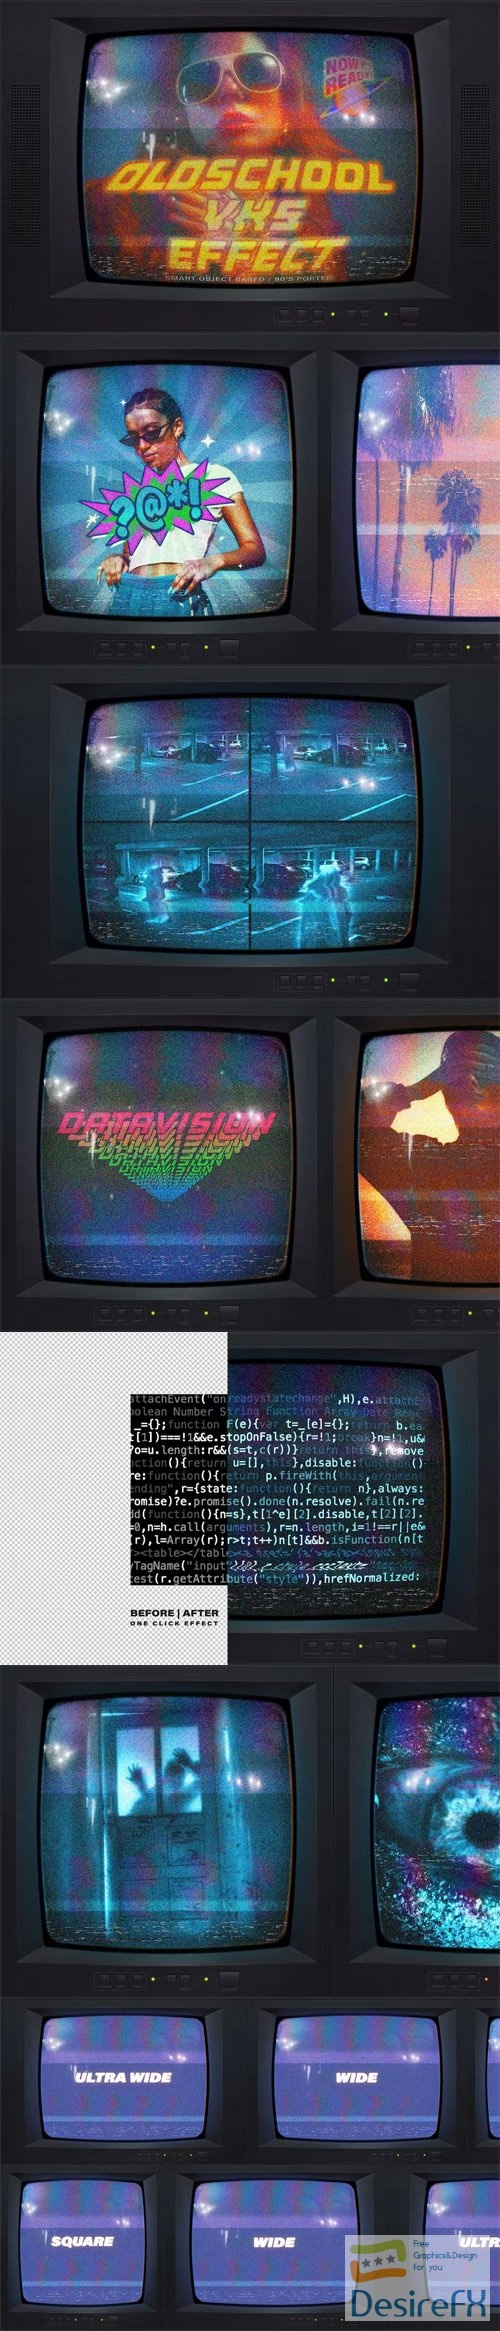 VHS Machine - Retro Monitor Effect for Photoshop